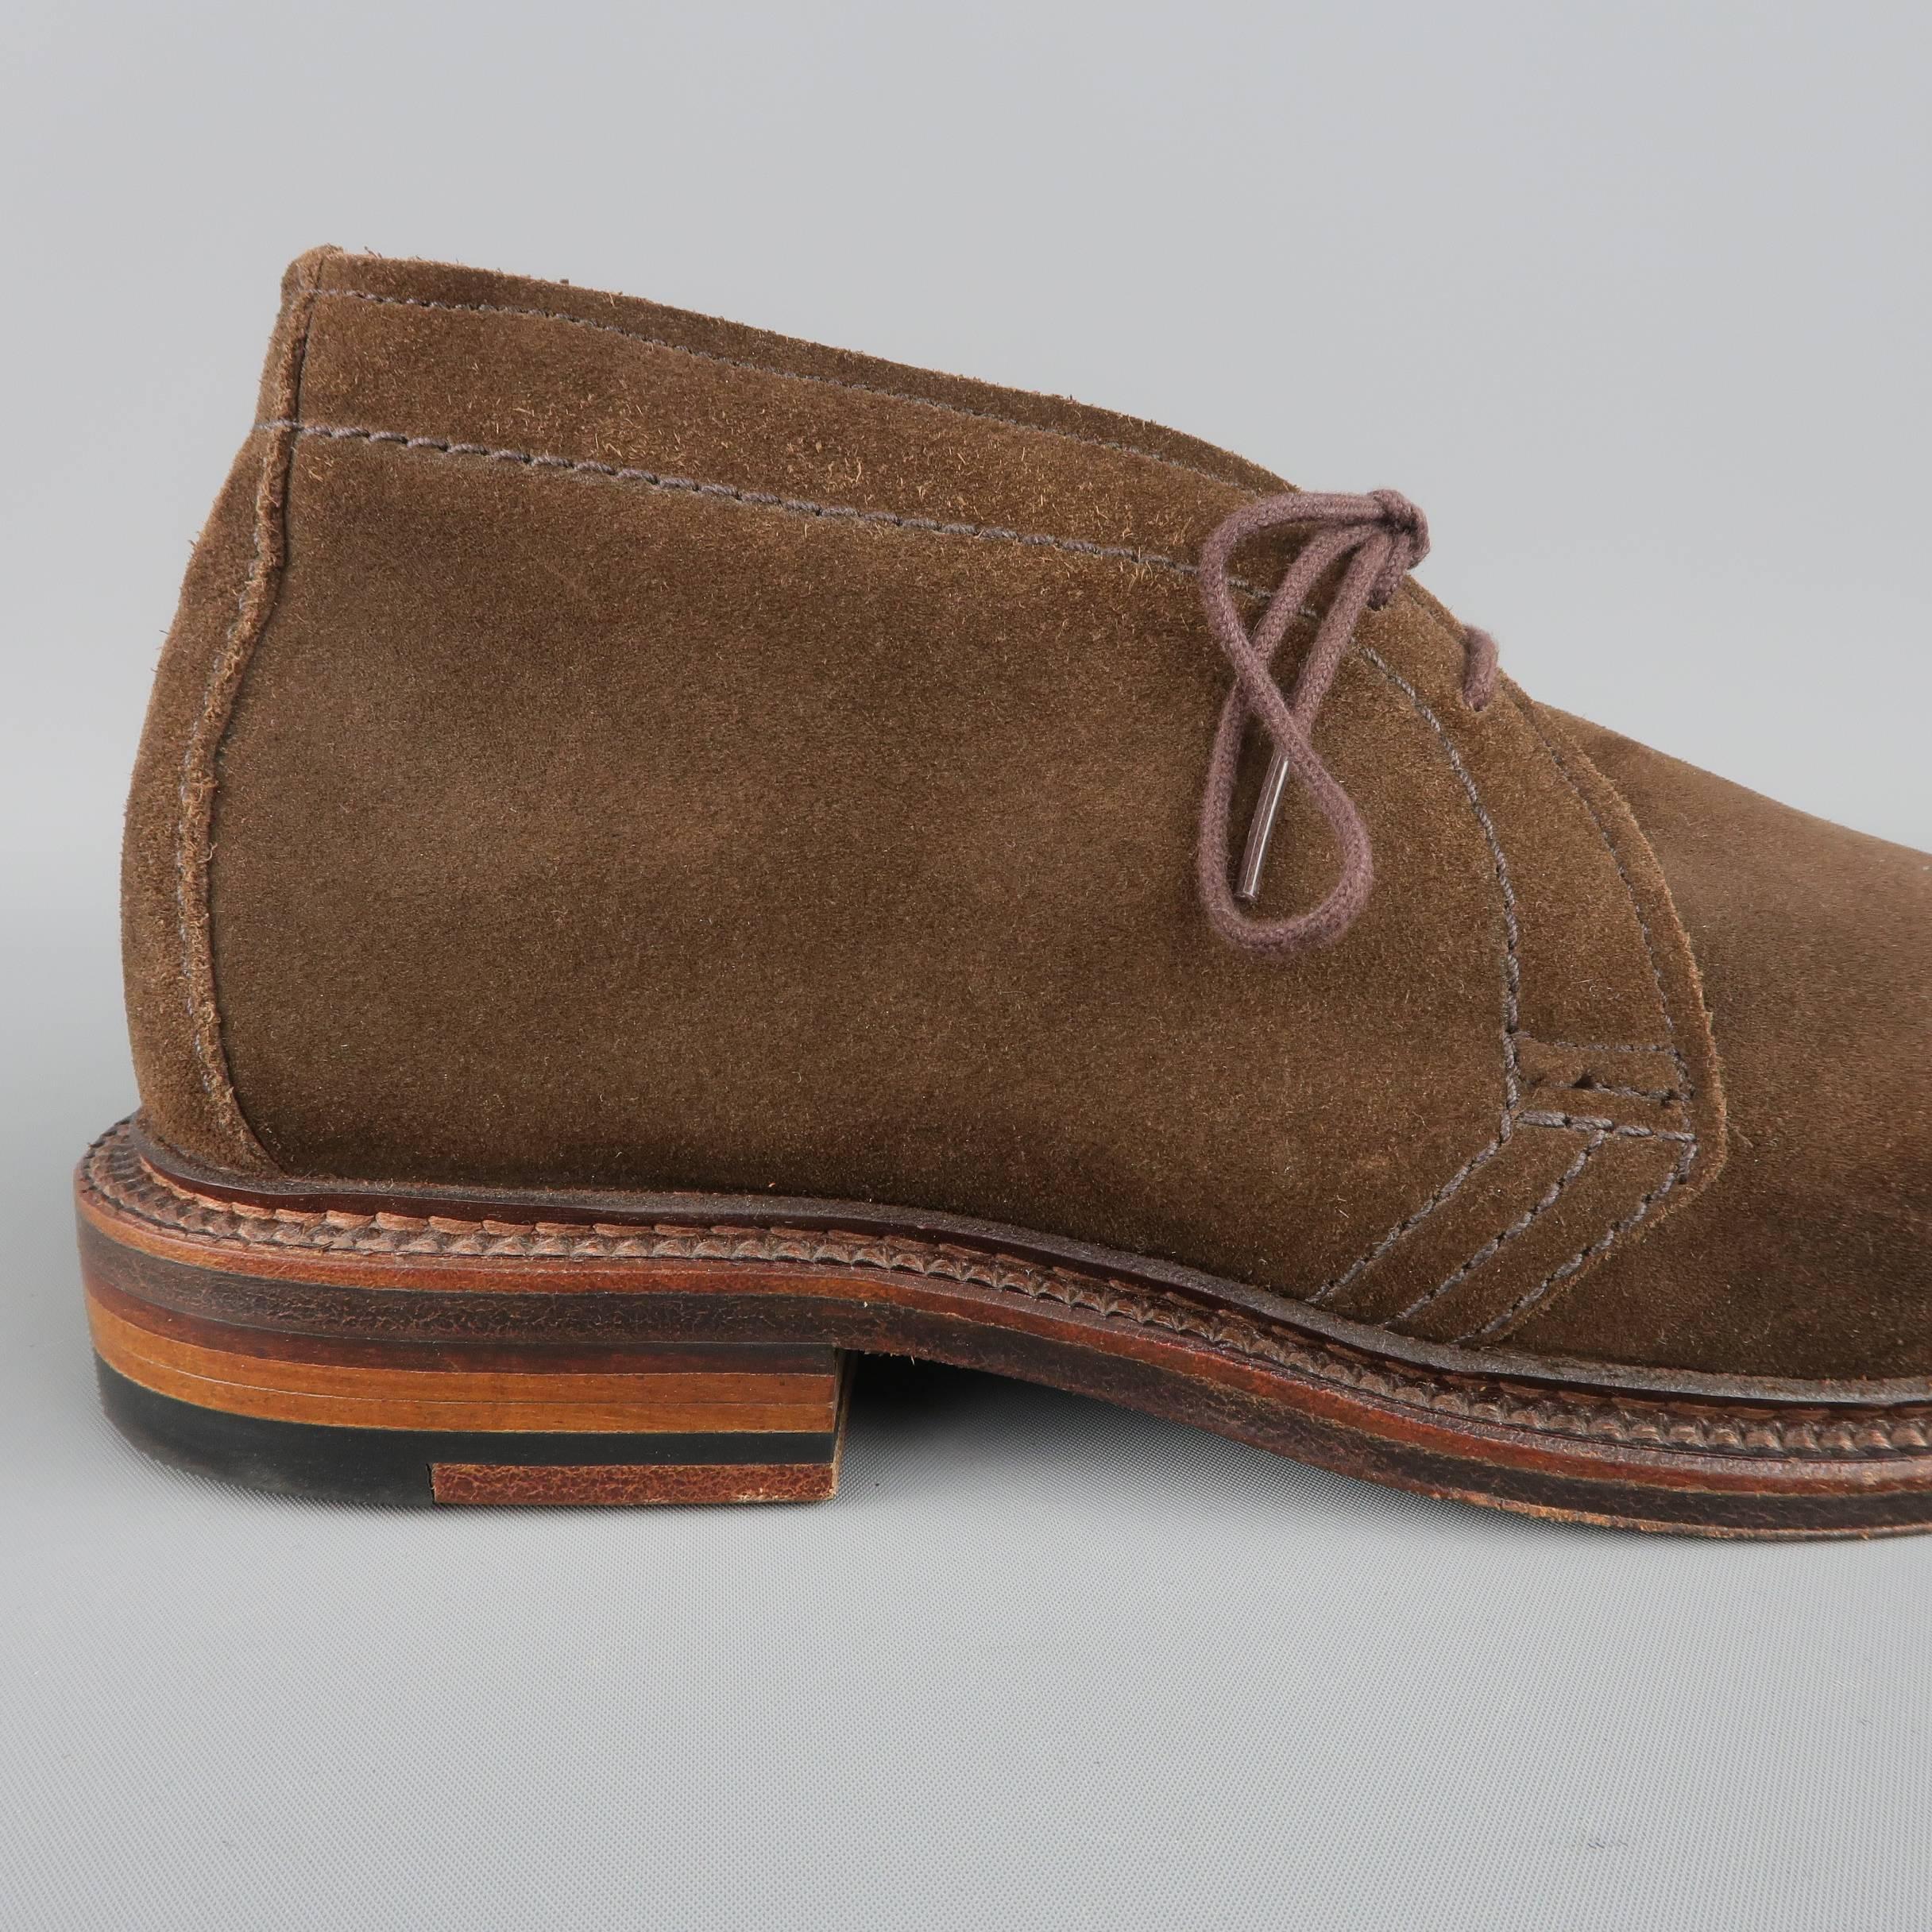 ALDEN ankle length desert chukka style boots come in chocolate brown suede with a stacked leather heeled sole. Discolorations on sides from storage. Never worn. As-Is. Made in USA.
 
Brand New with Defect.
Marked: 7.5
 
Outsole: 11.5 x 4 in.
Height: